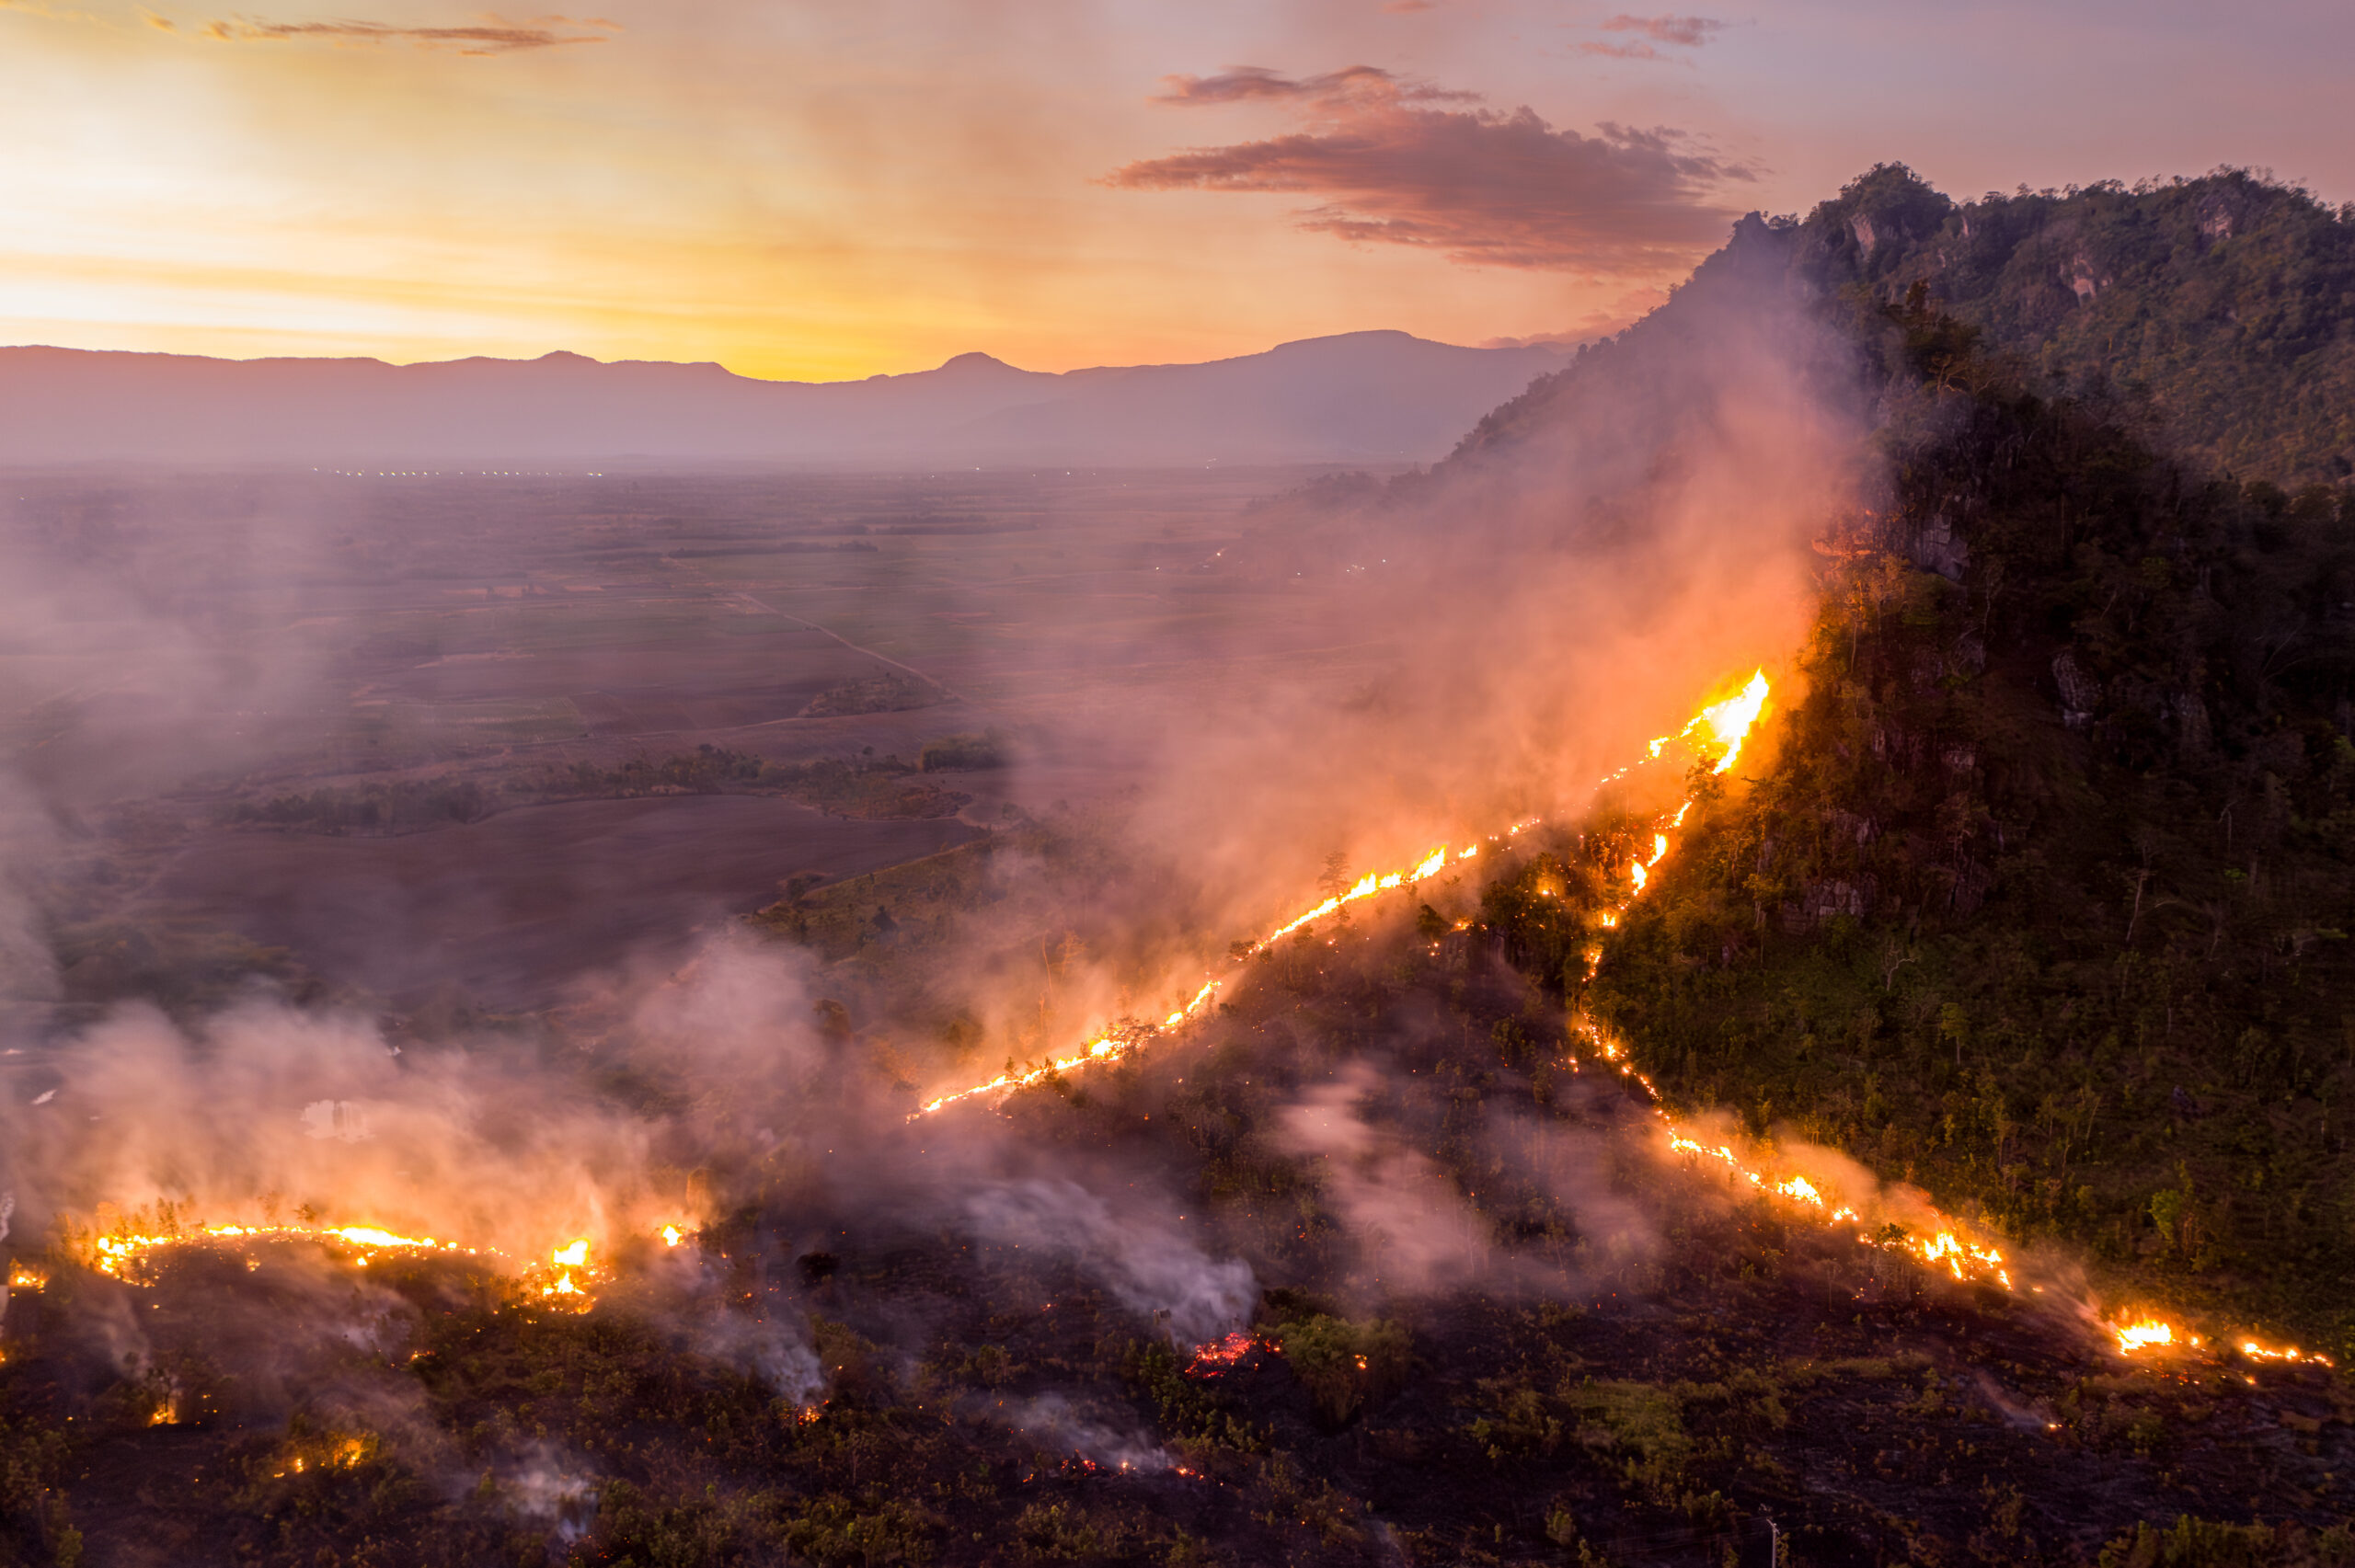 A fire burns through a forest within the 9,059 hectare Chinese-owned Great Field economic land concession in December 2022. Image by Andy Ball / Mongabay.